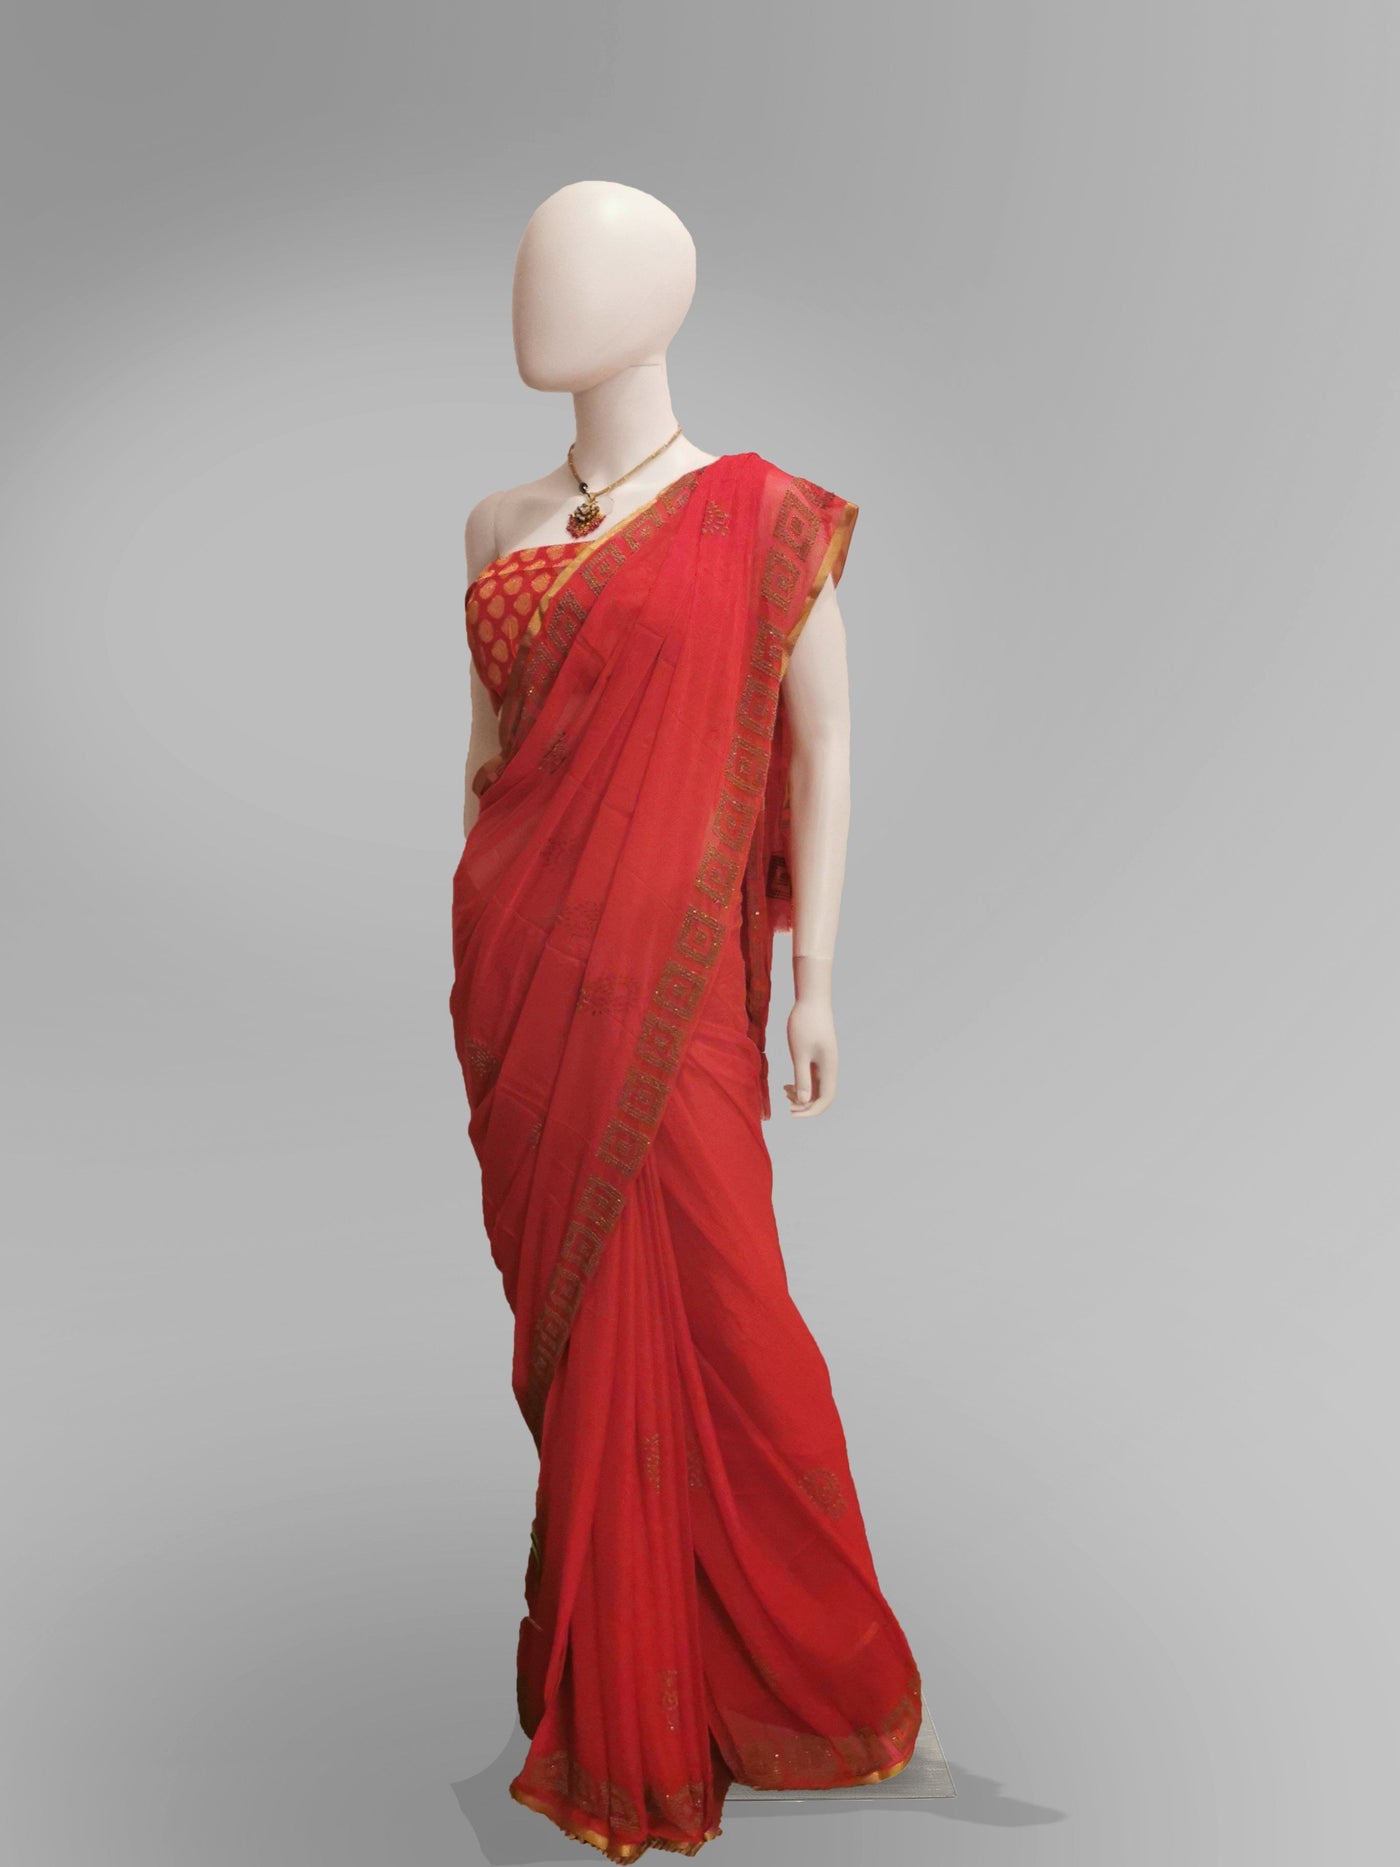 Saree in Fiery Red With Subtle Golden Embroidery Indian Clothing in Denver, CO, Aurora, CO, Boulder, CO, Fort Collins, CO, Colorado Springs, CO, Parker, CO, Highlands Ranch, CO, Cherry Creek, CO, Centennial, CO, and Longmont, CO. NATIONWIDE SHIPPING USA- India Fashion X